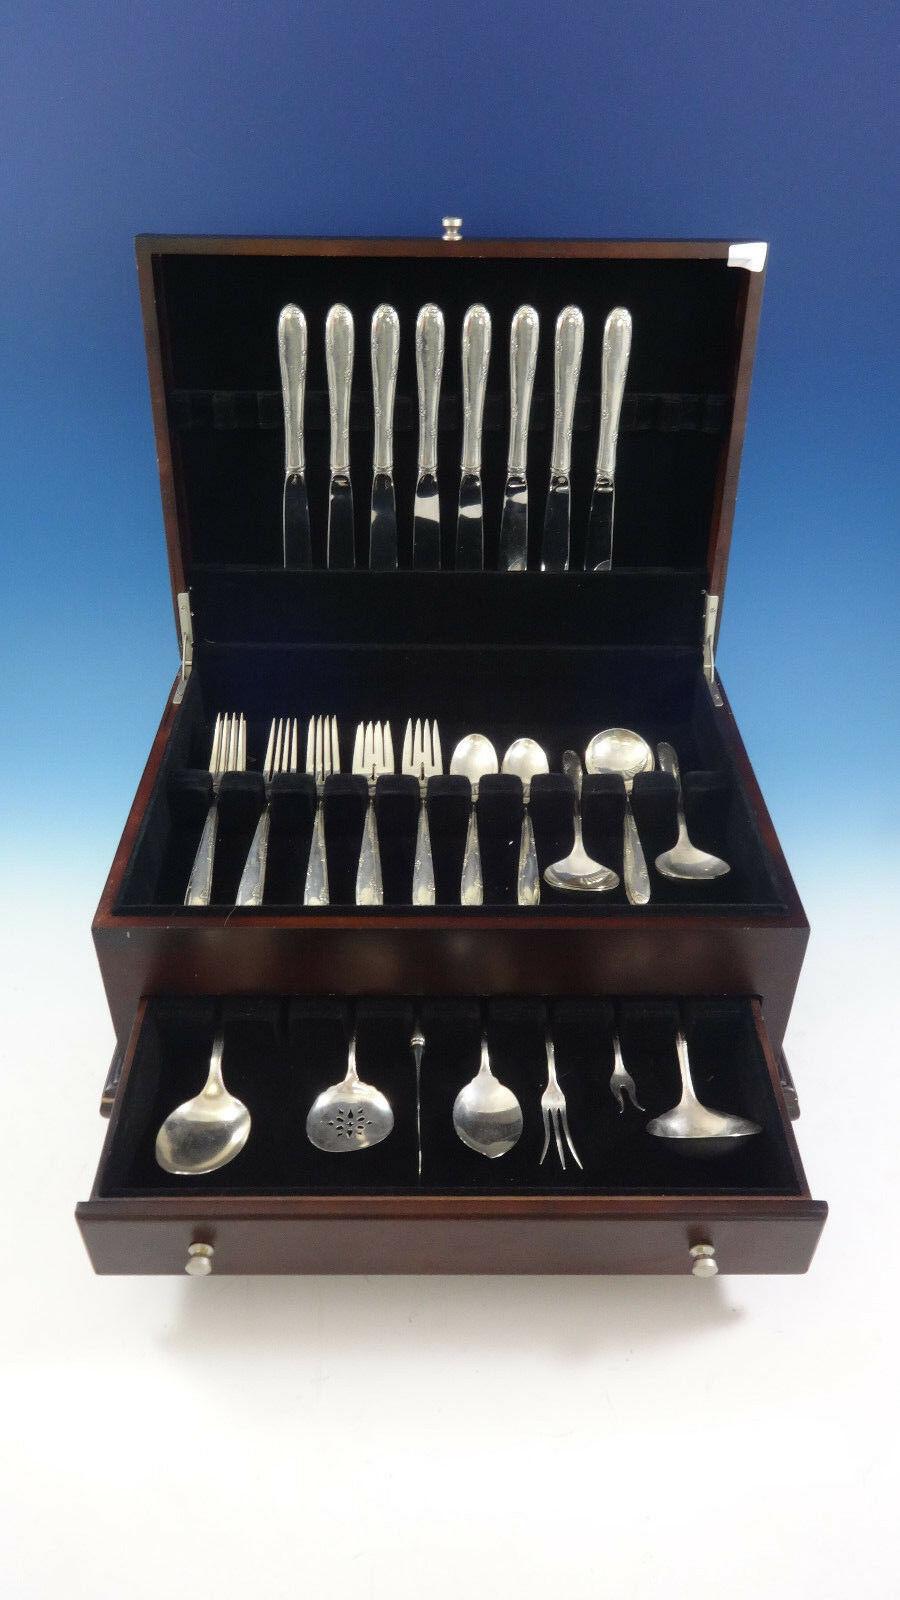 Madeira by Towle sterling silver flatware set of 47 pieces. This set includes:

8 knives, 9